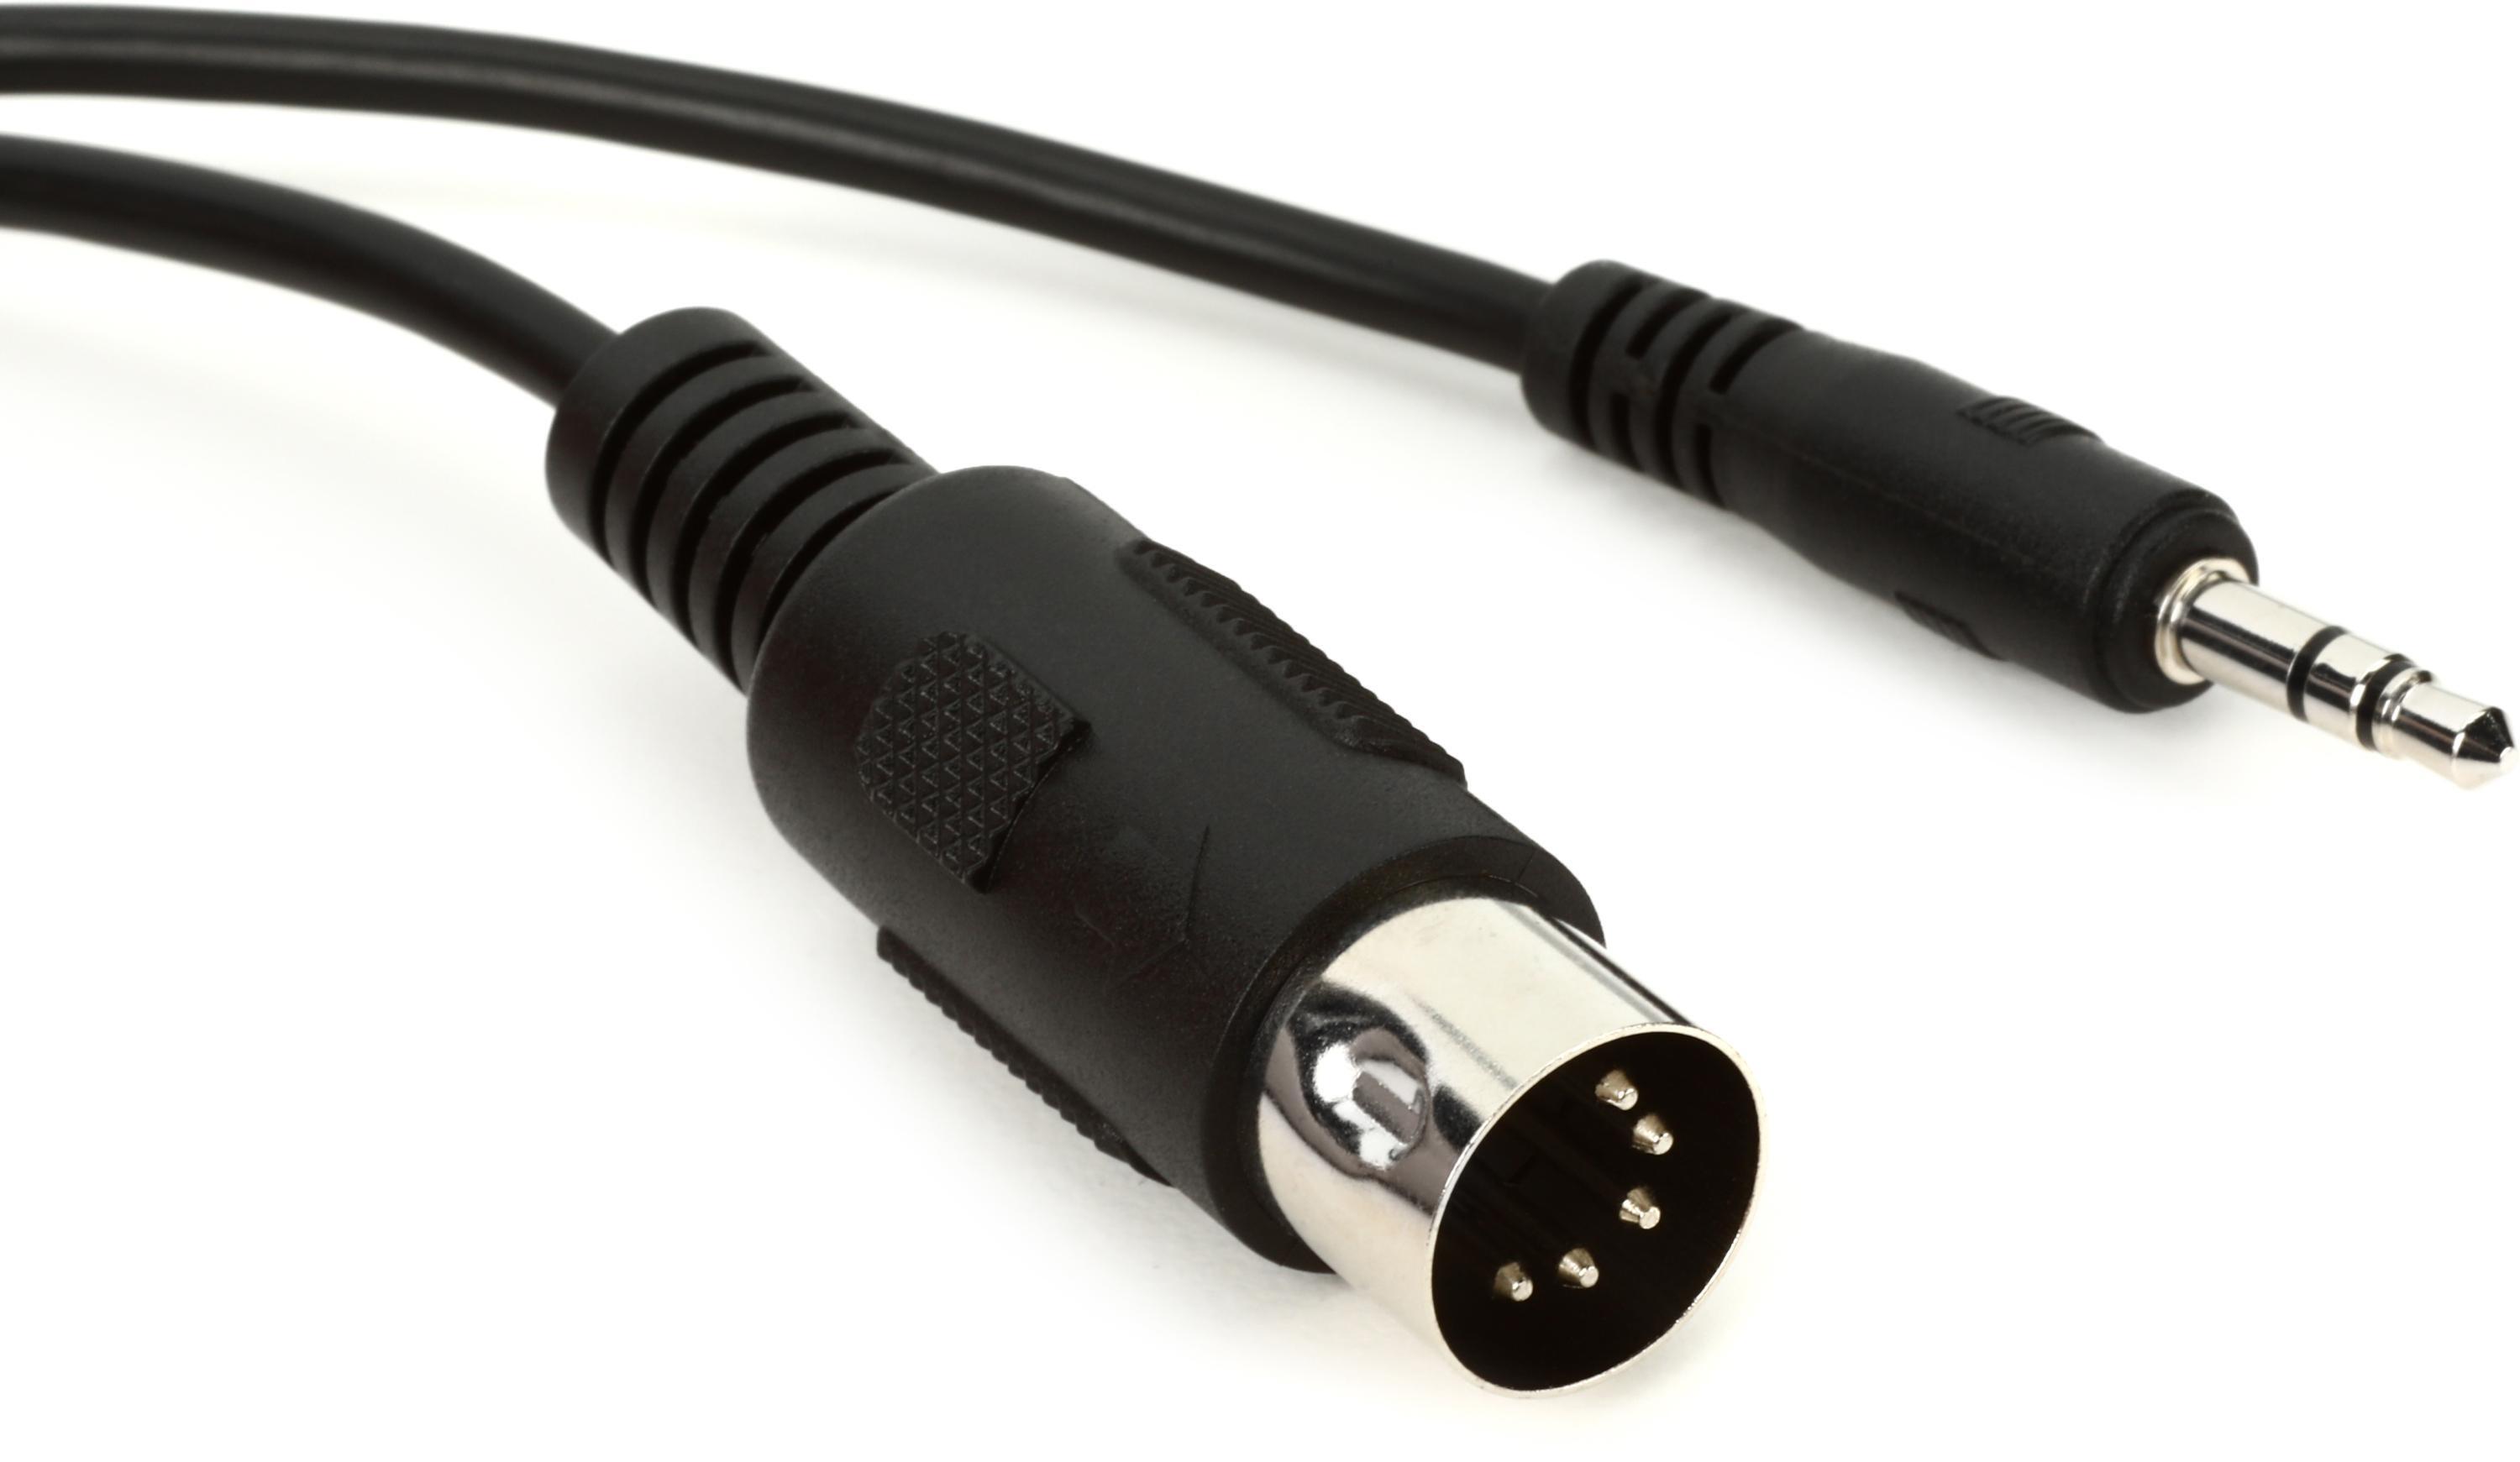 1010music MIDI Adapter Cable - Type B 3.5mm TRS Male to 5-pin DIN - 4.6 foot